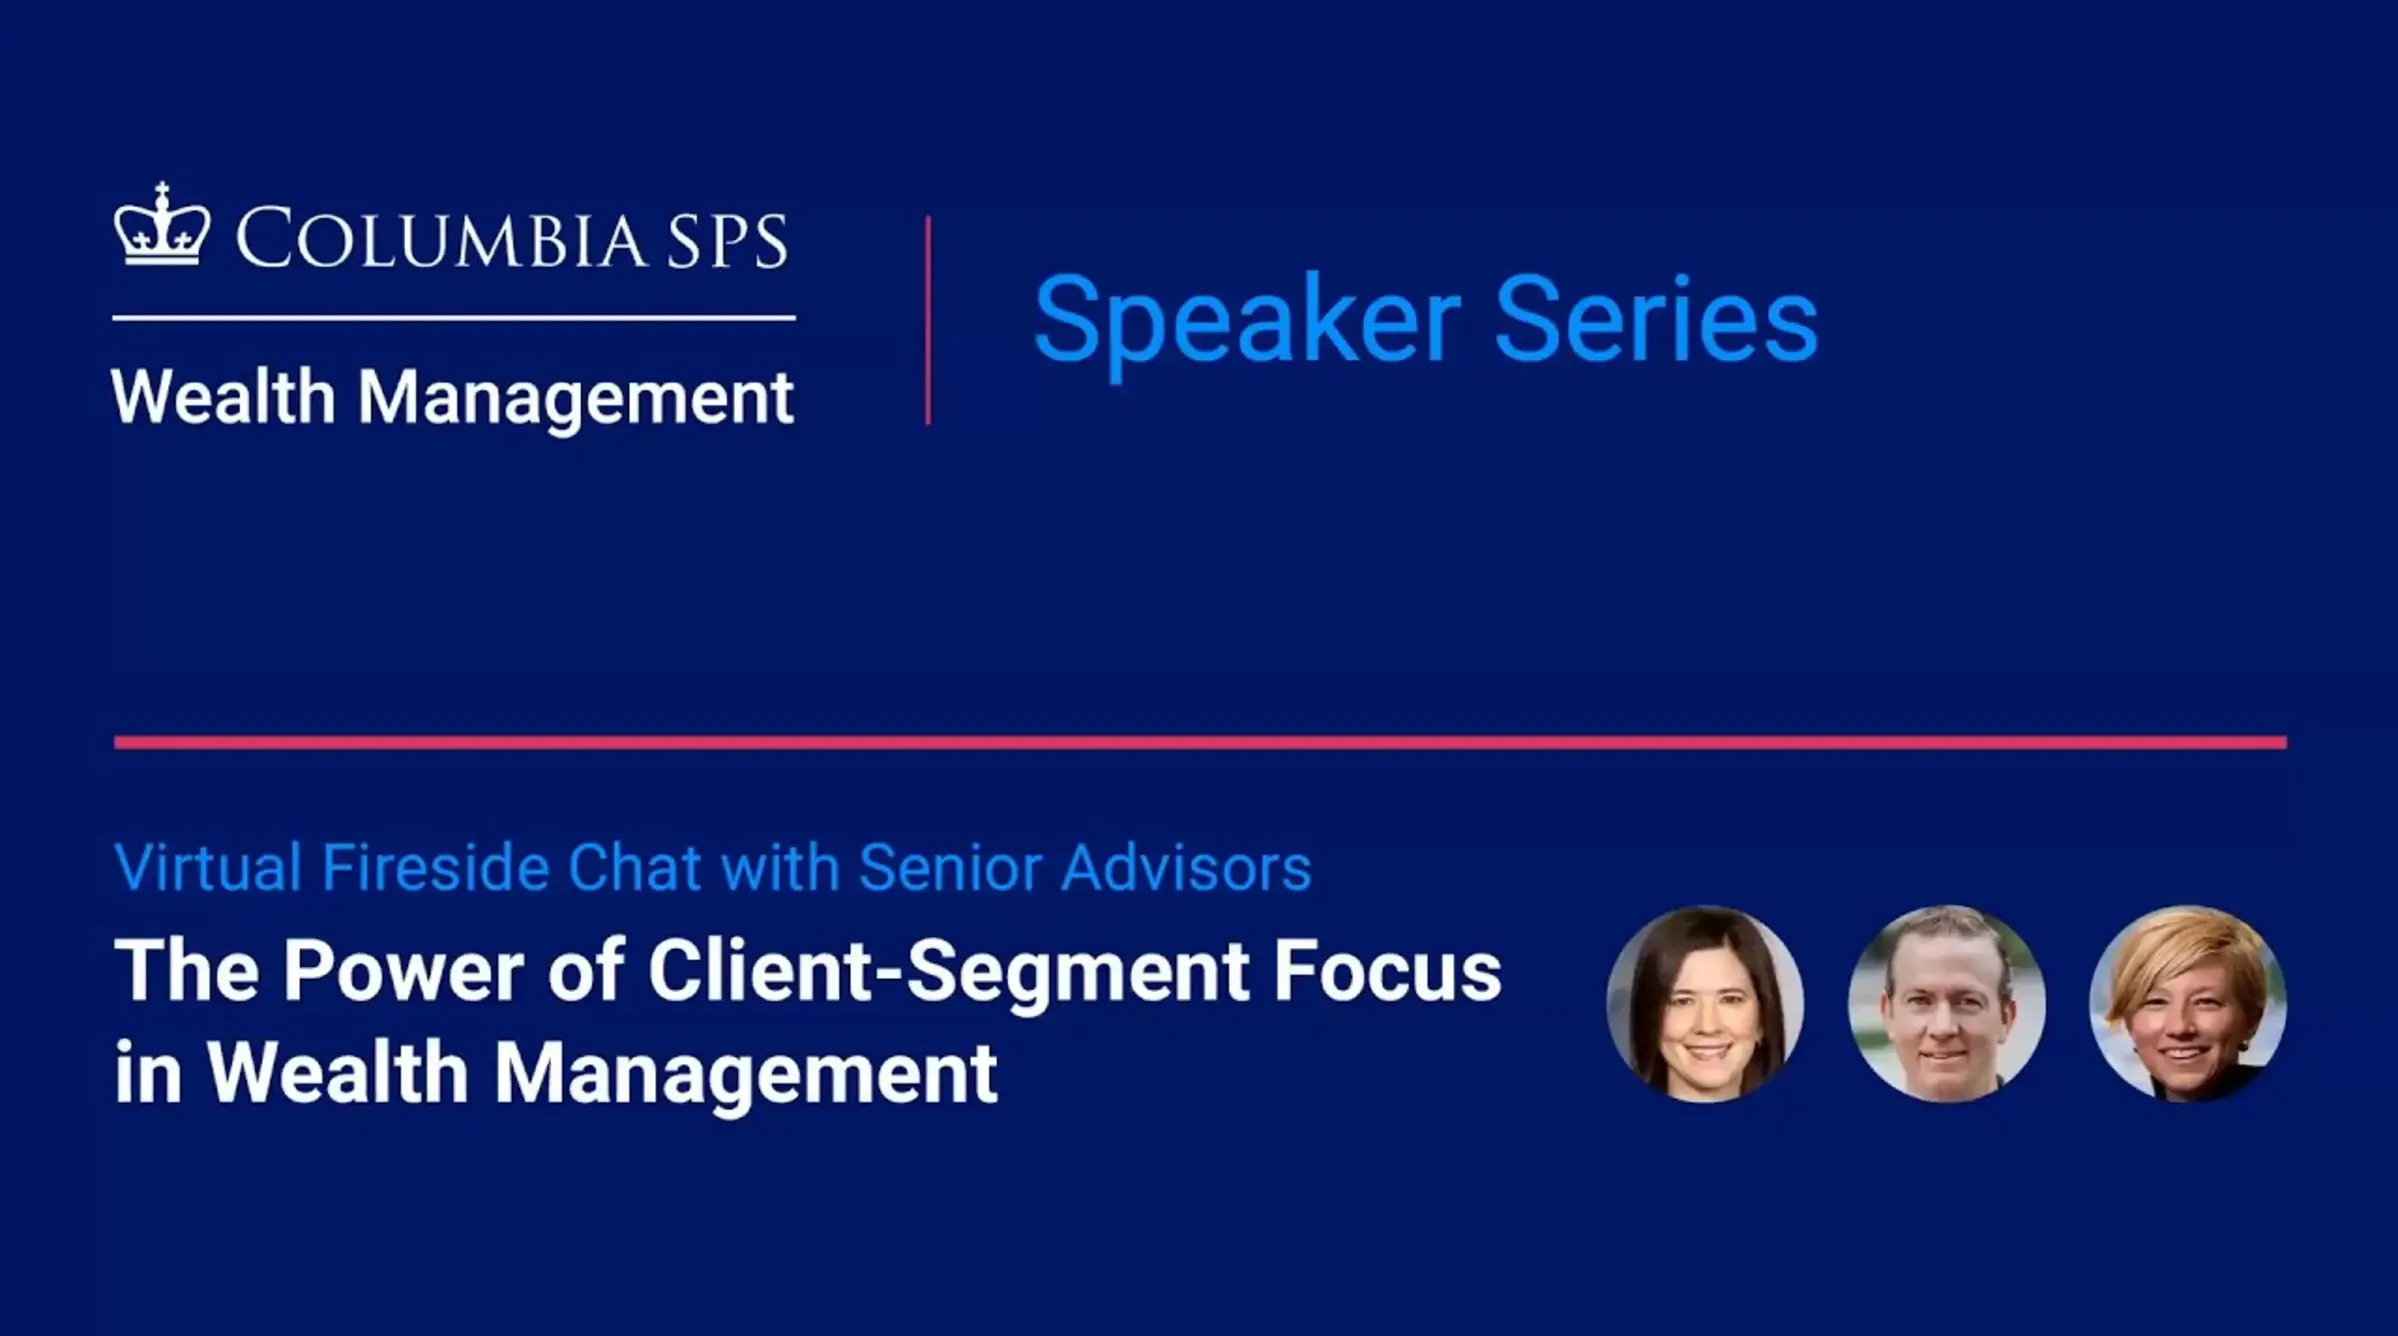 Virtual Fireside Chat with Senior Advisors: The Power of Client-Segment Focus in Wealth Management